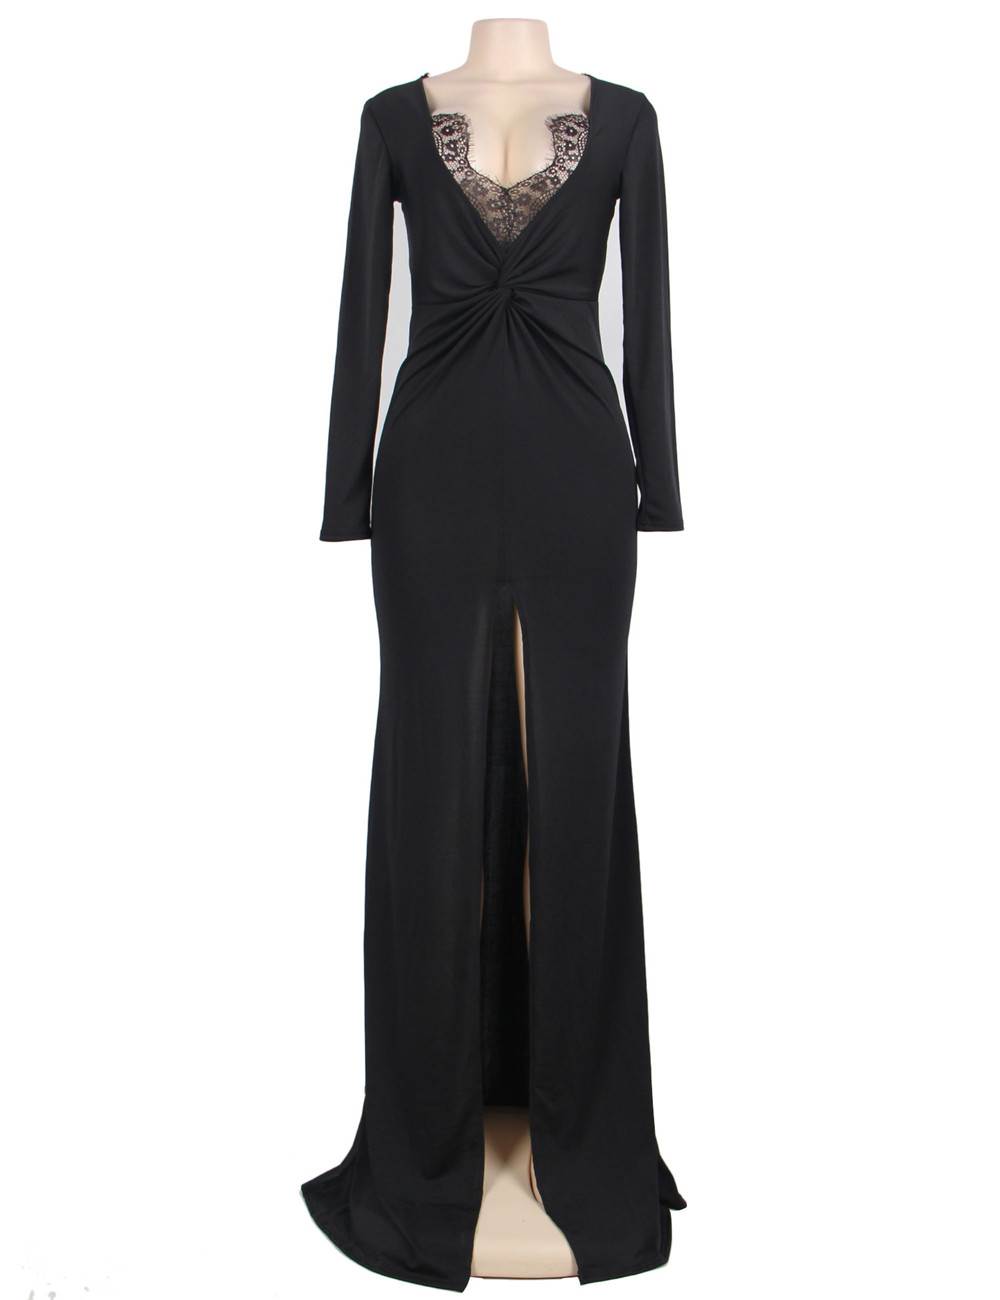 Cheap Sexy Long Sleeve Trim Black Lace Party Gown